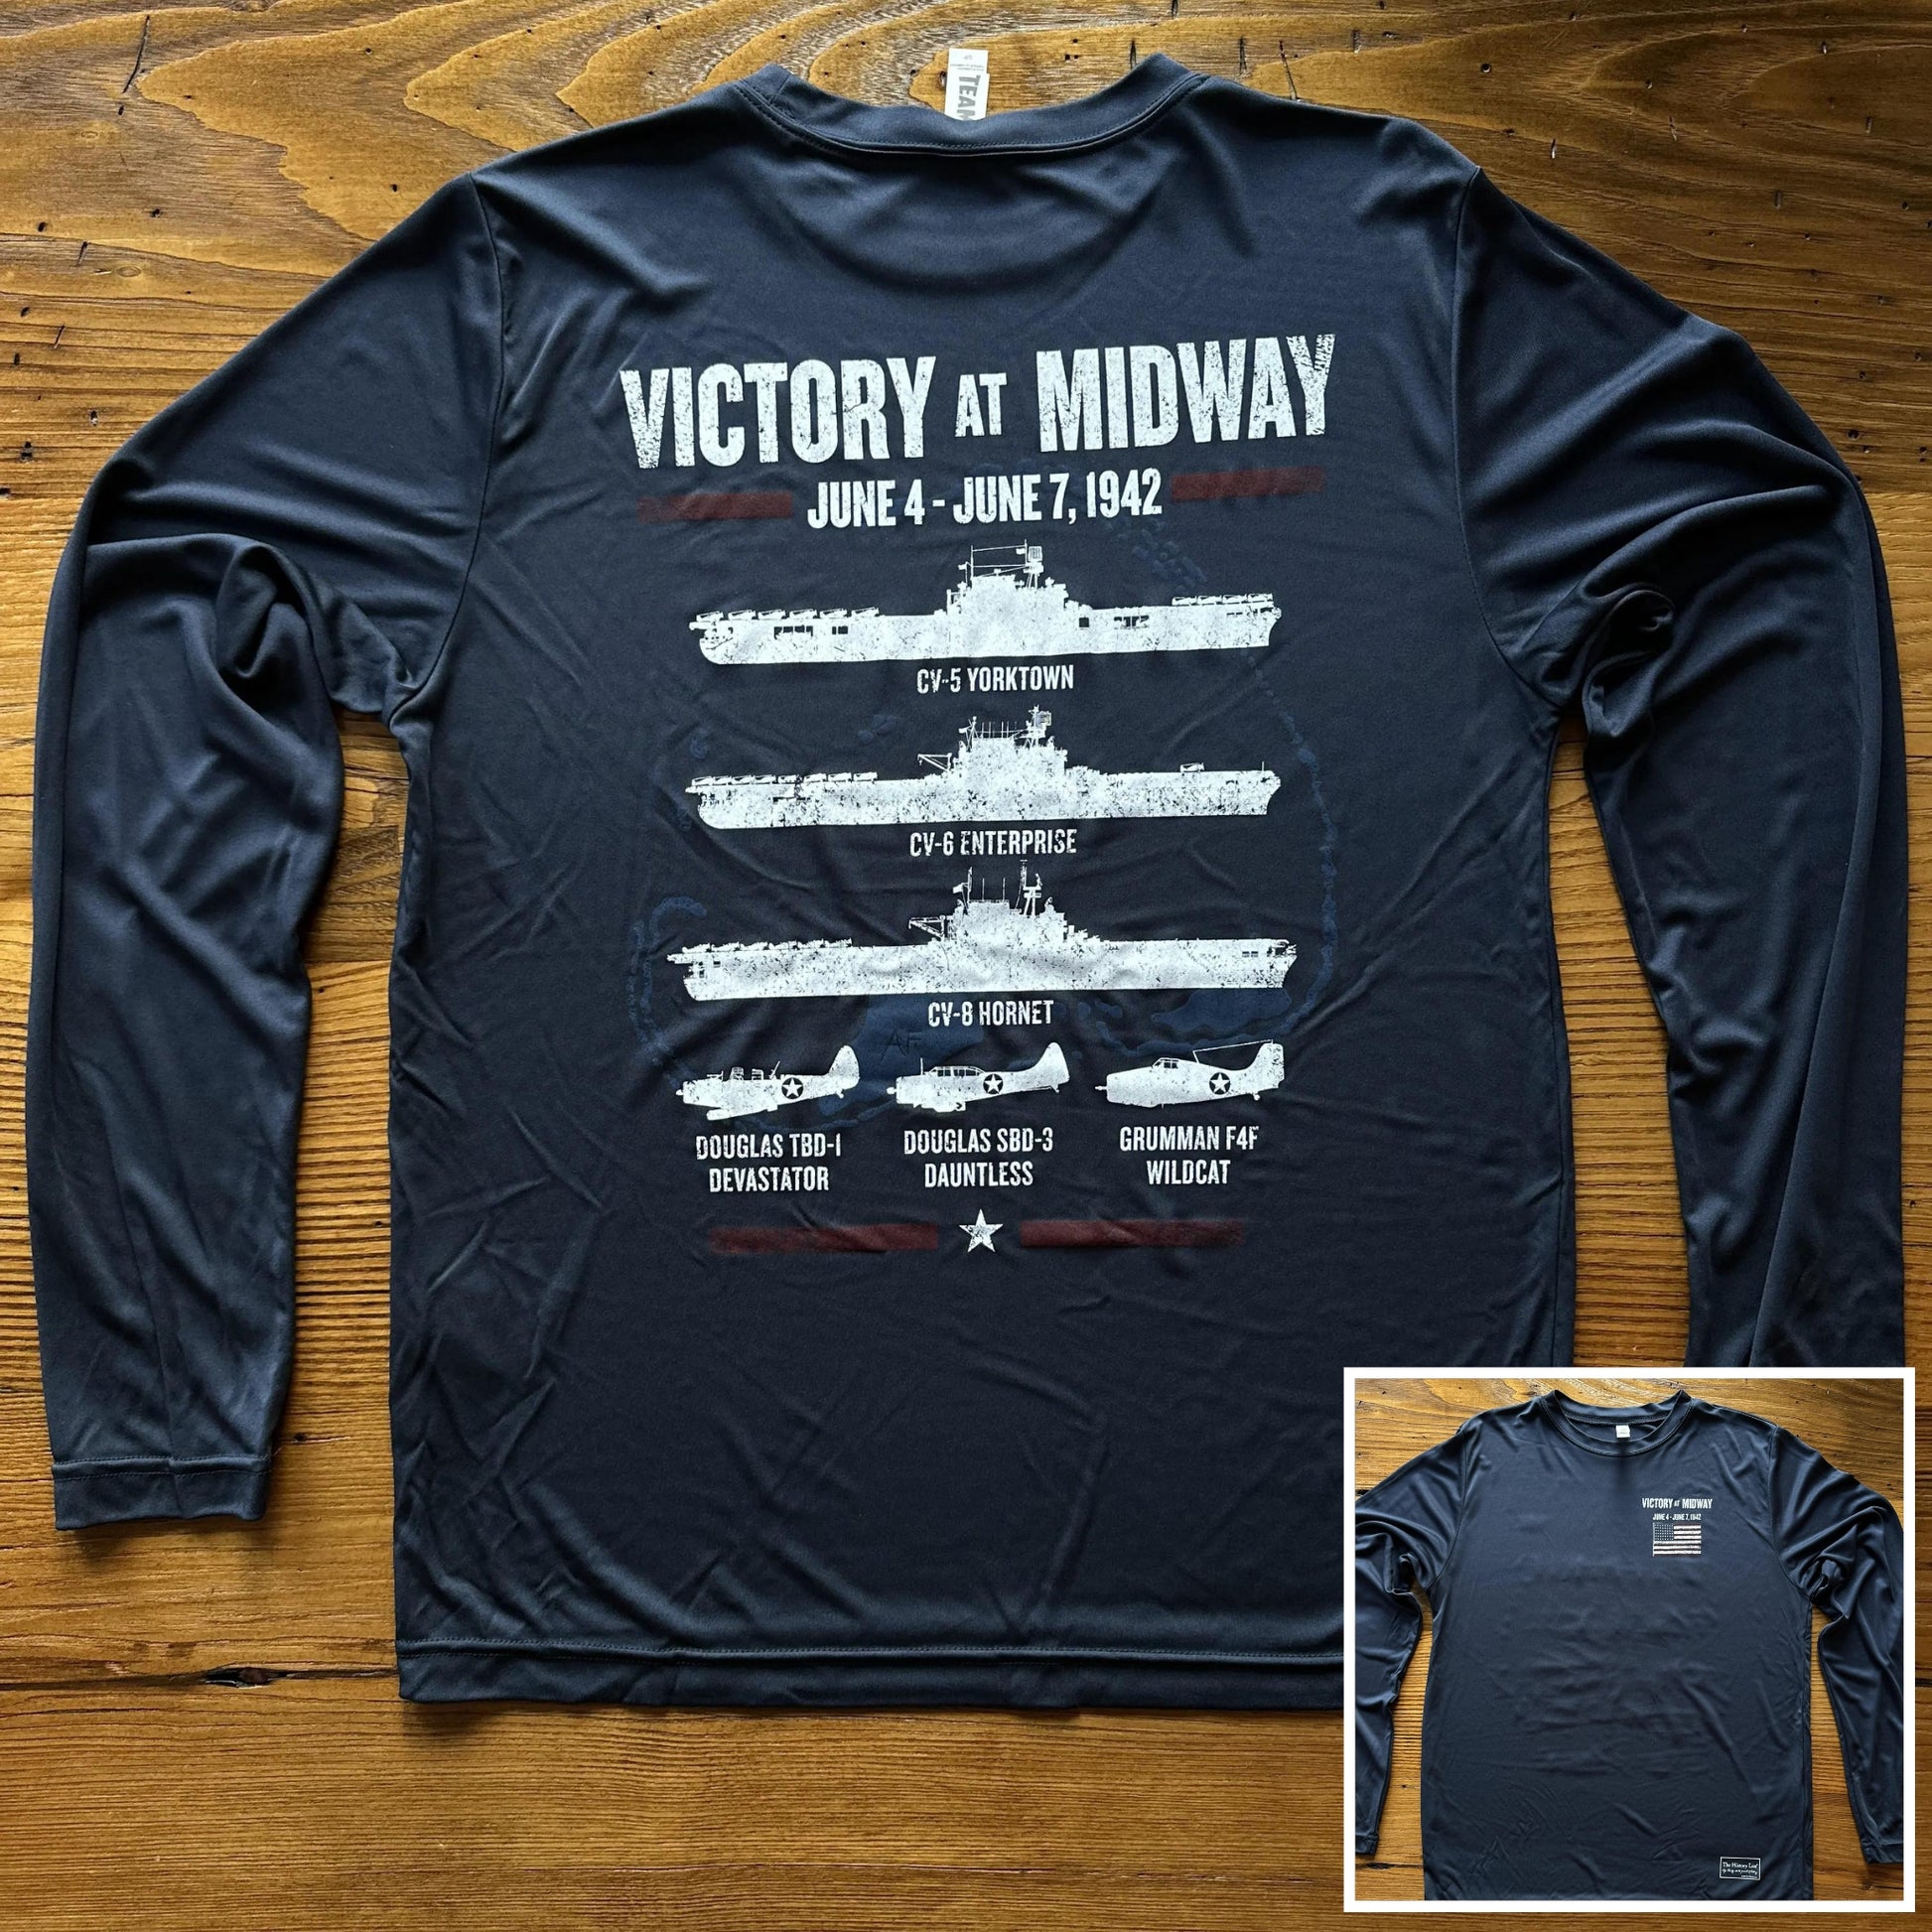 Victory at Midway On Moisture-Wicking 100% Polyester Interlock with SPF 40+ UV Protection - Long-Sleeved Men's Cut / S